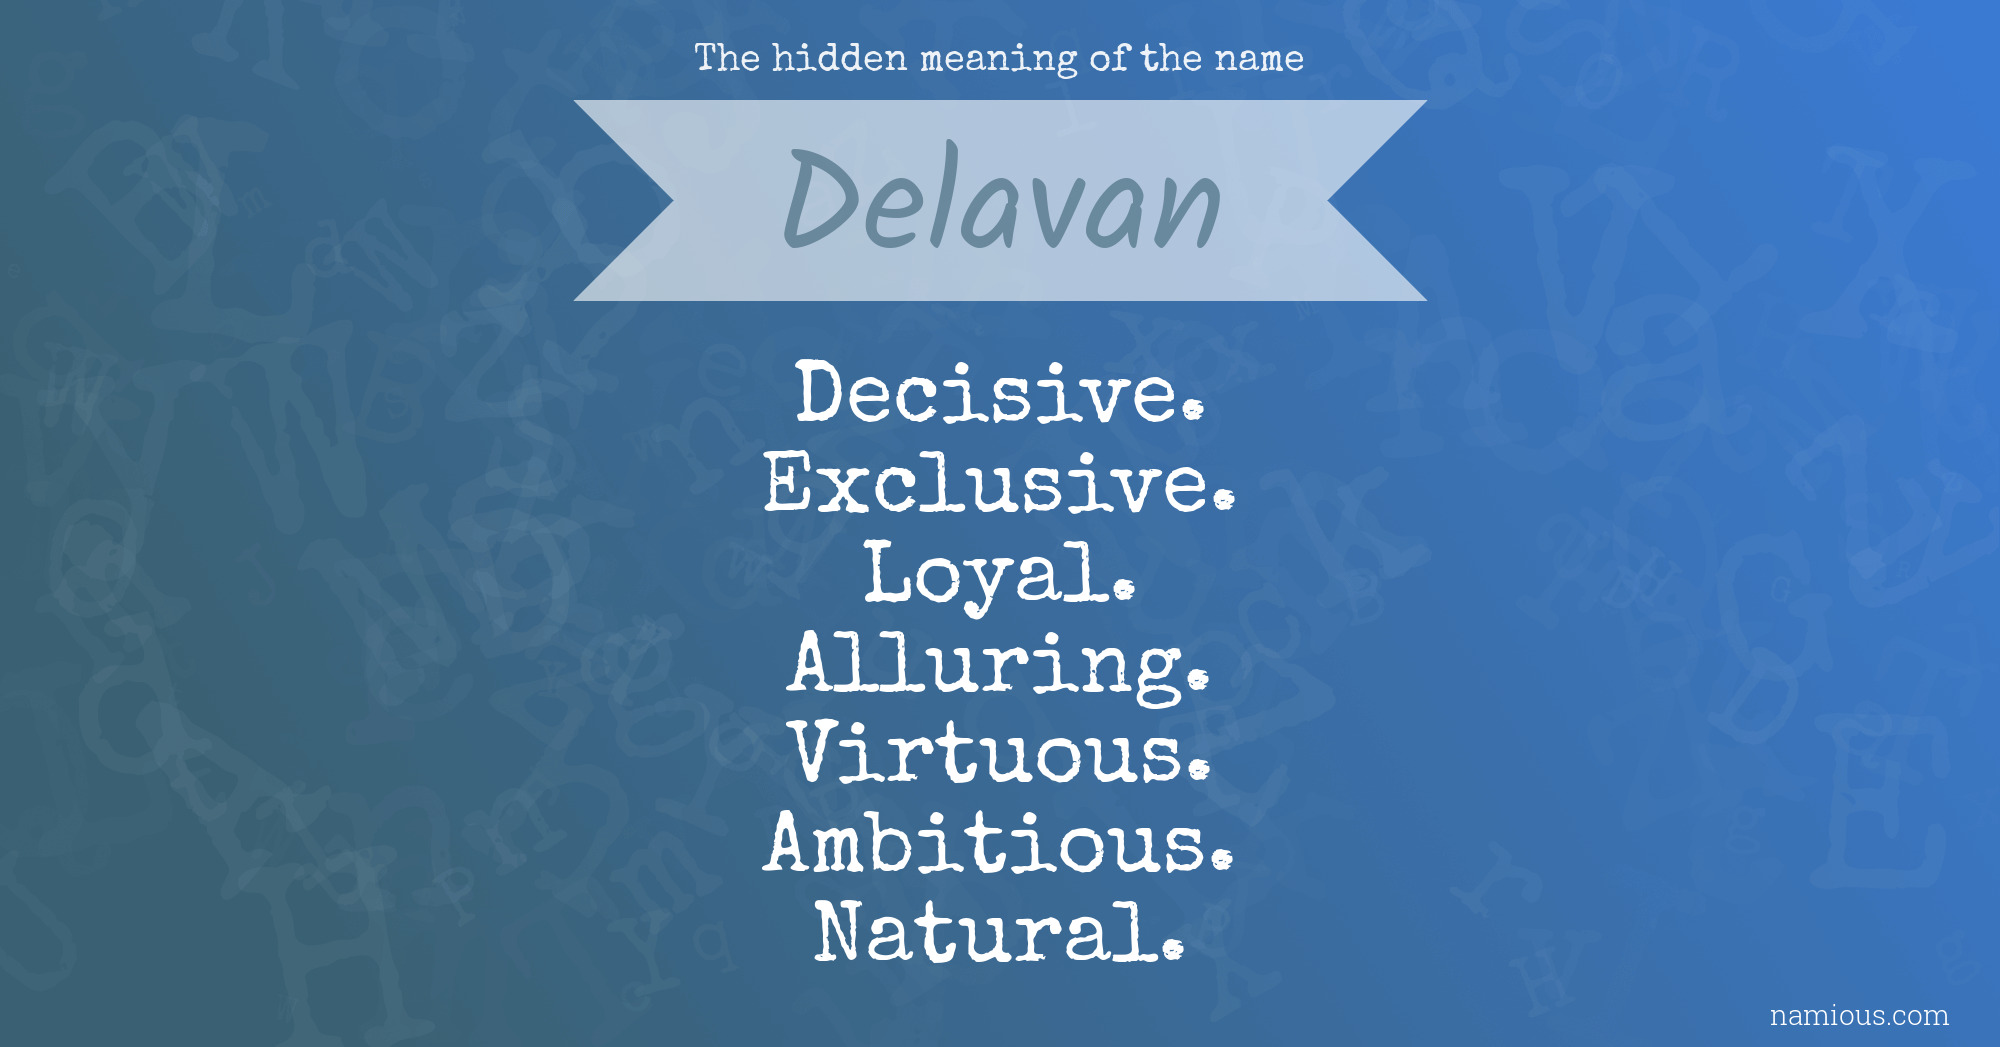 The hidden meaning of the name Delavan